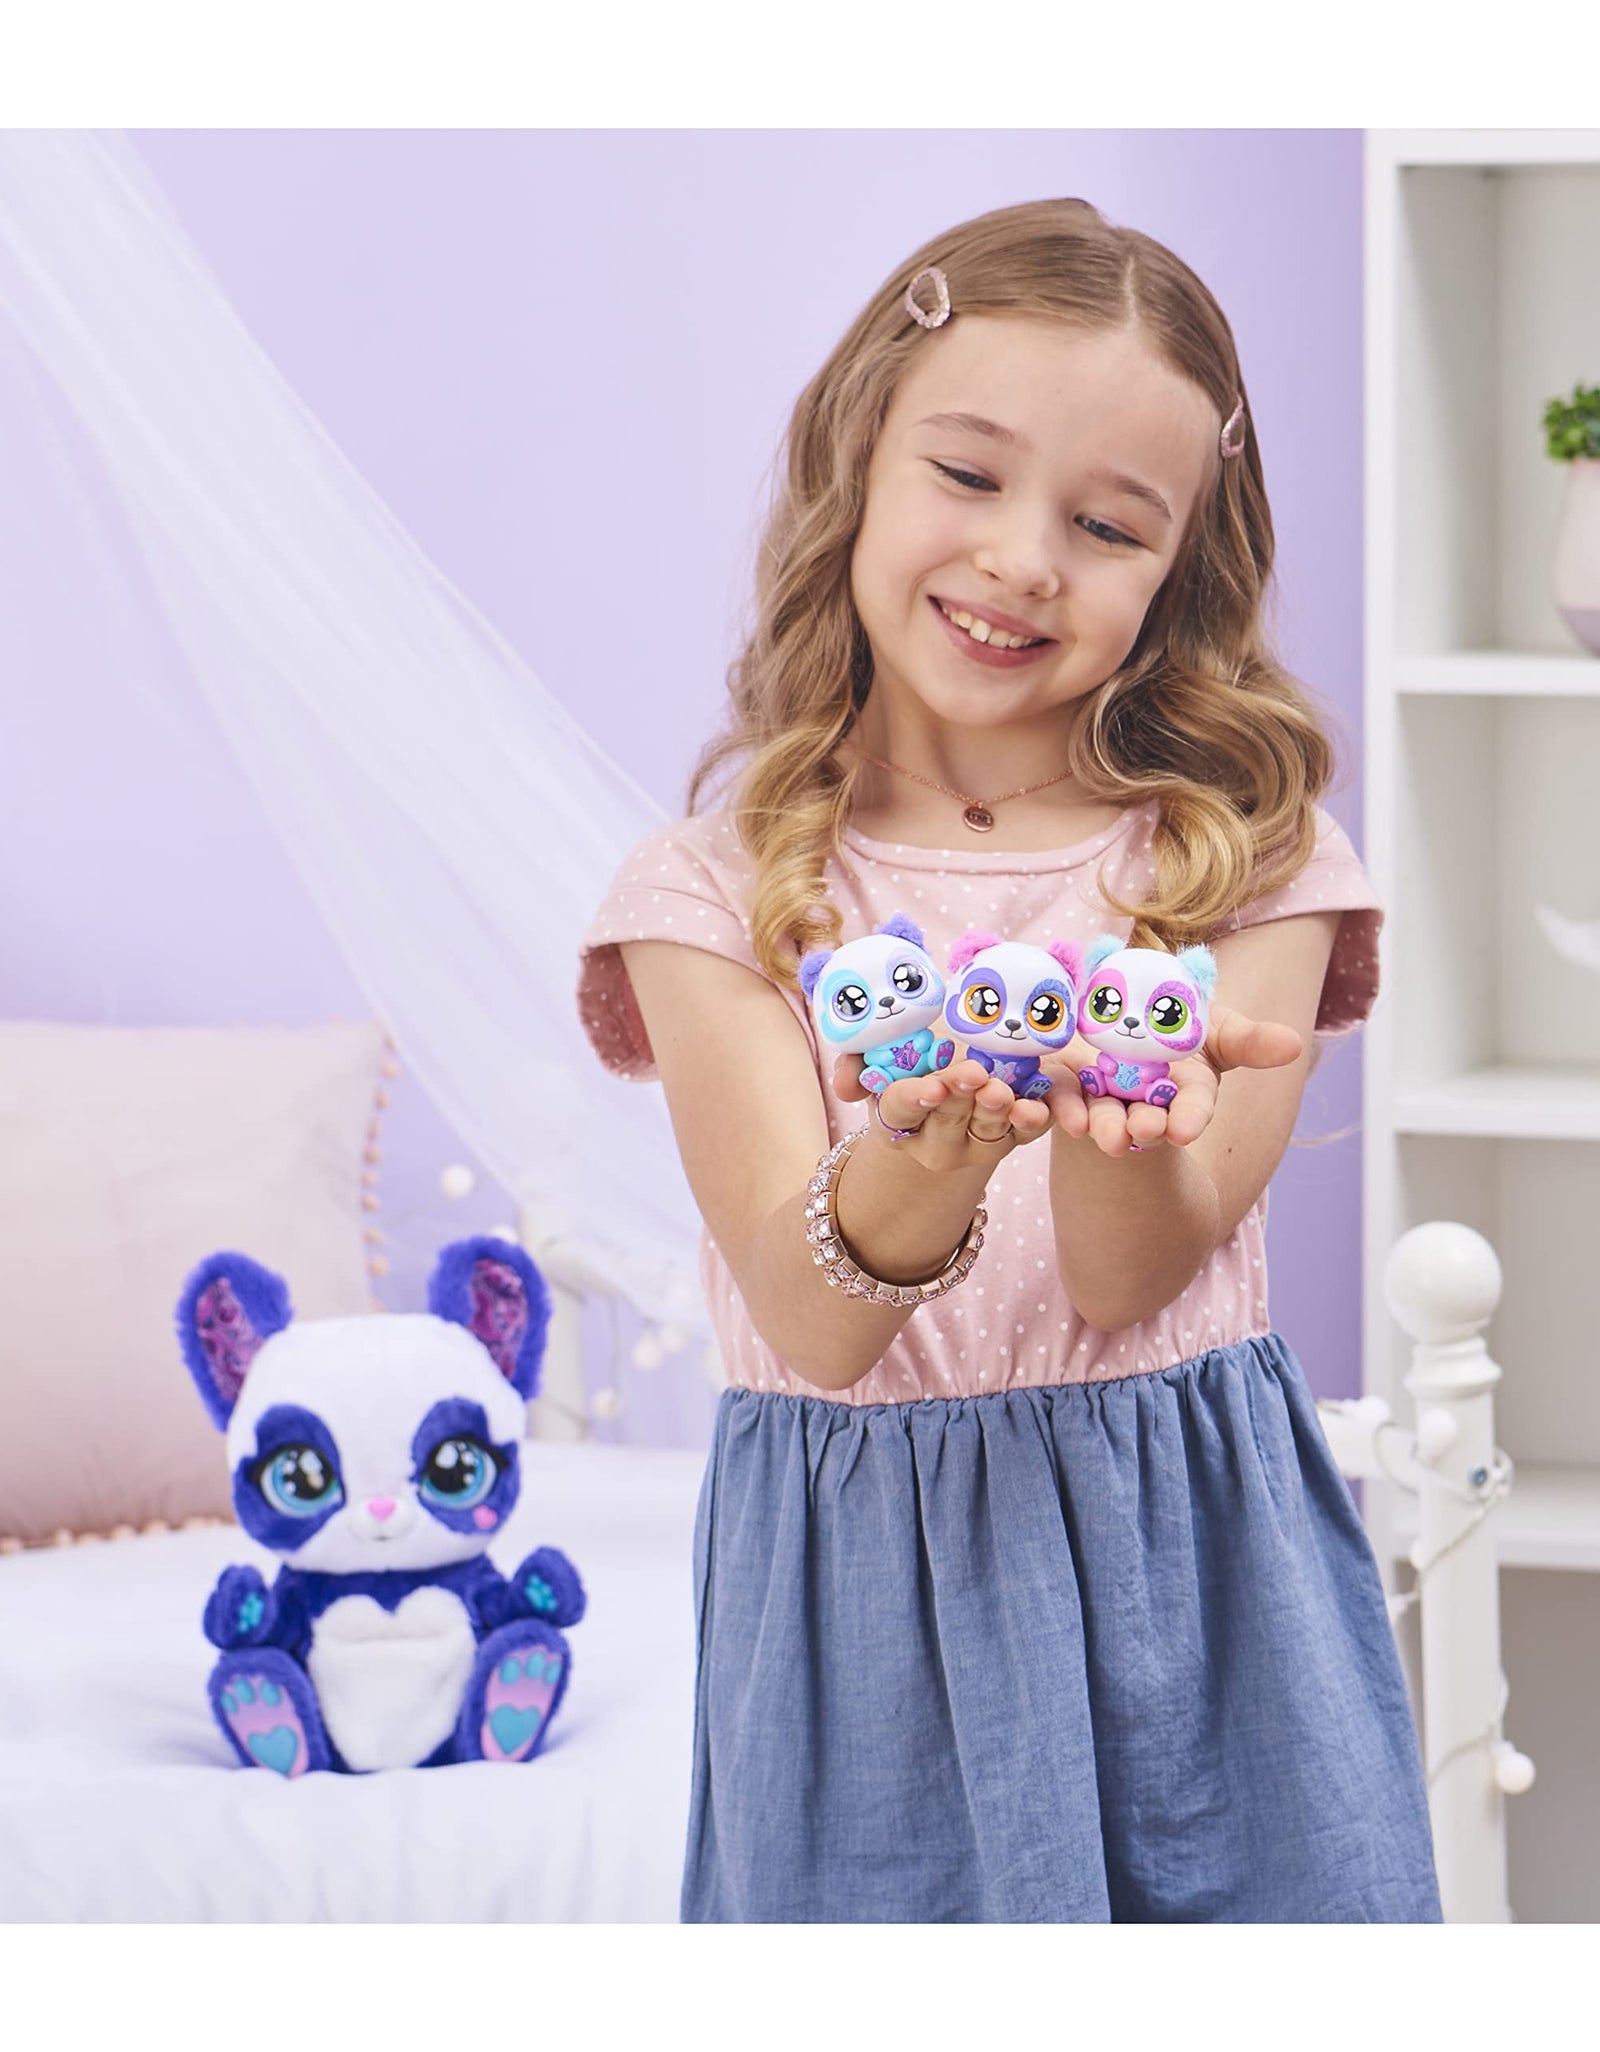 Peek-A-Roo, Interactive Panda-Roo Plush Toy with Mystery Baby and Over 150 Sounds and Actions, Kids Toys for Girls Ages 5 and up